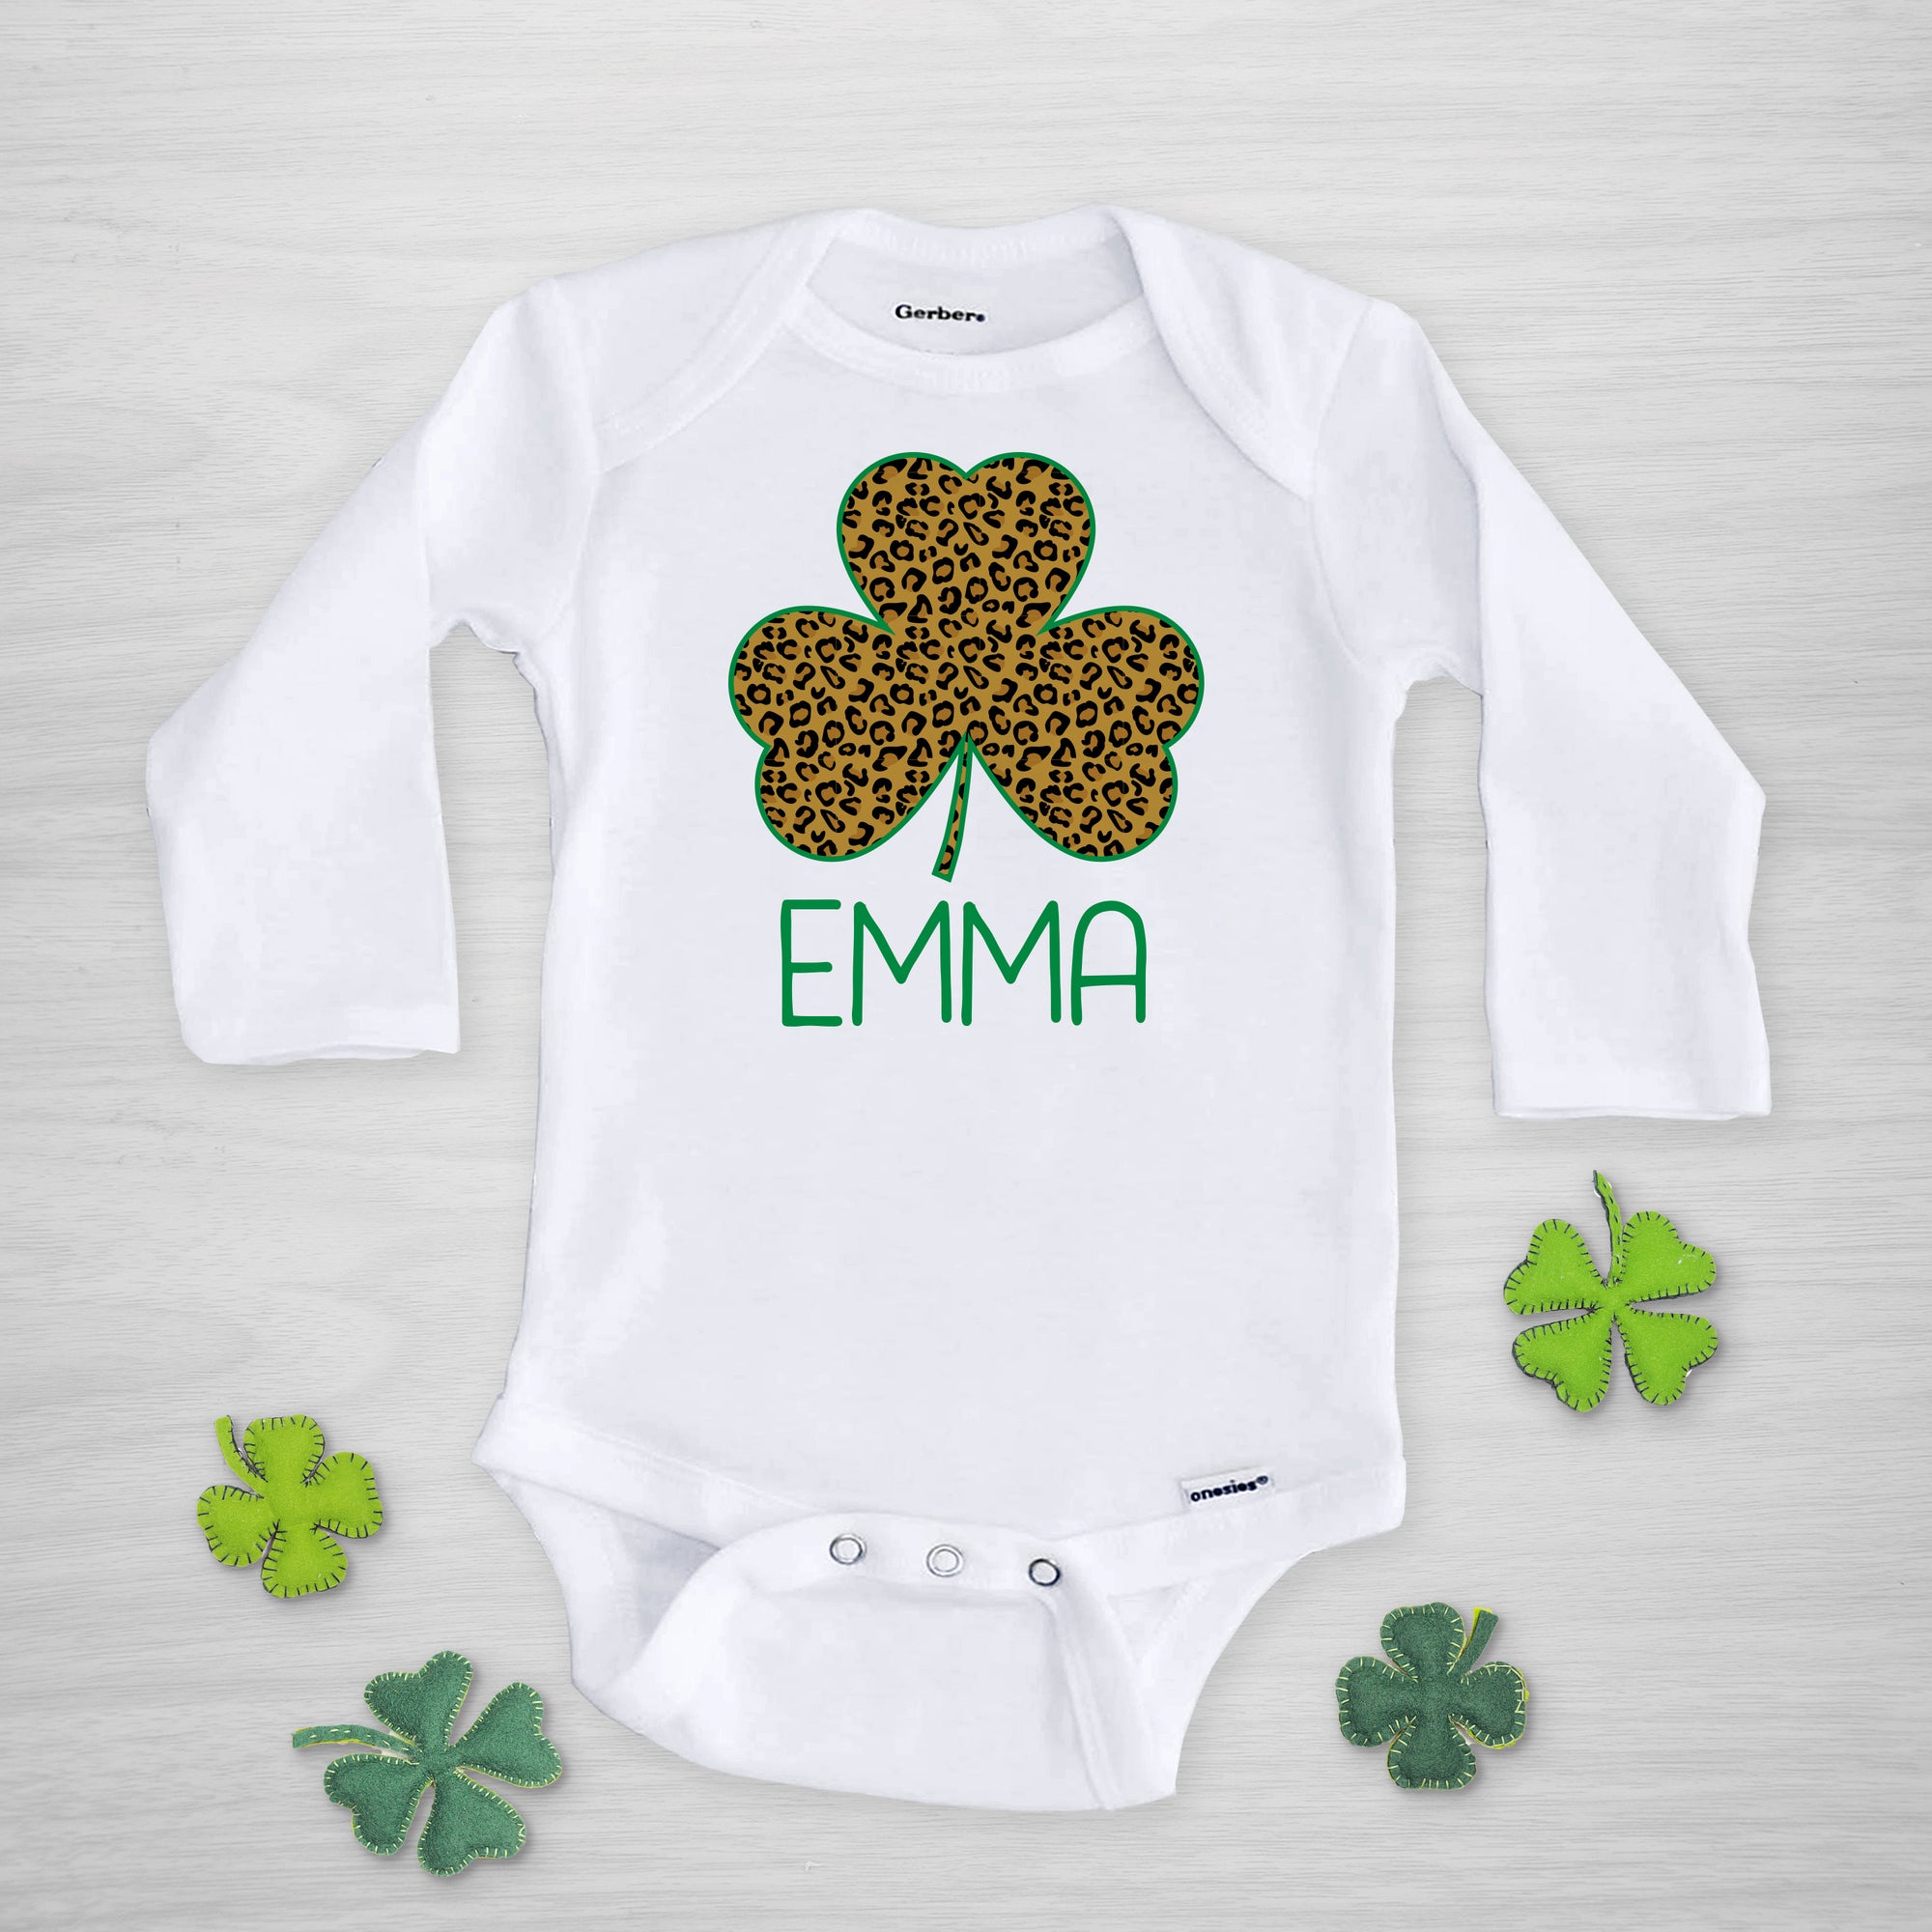 Leopard Print Shamrock Personalized Gerber Onesie for St. Patrick's Day, long sleeved